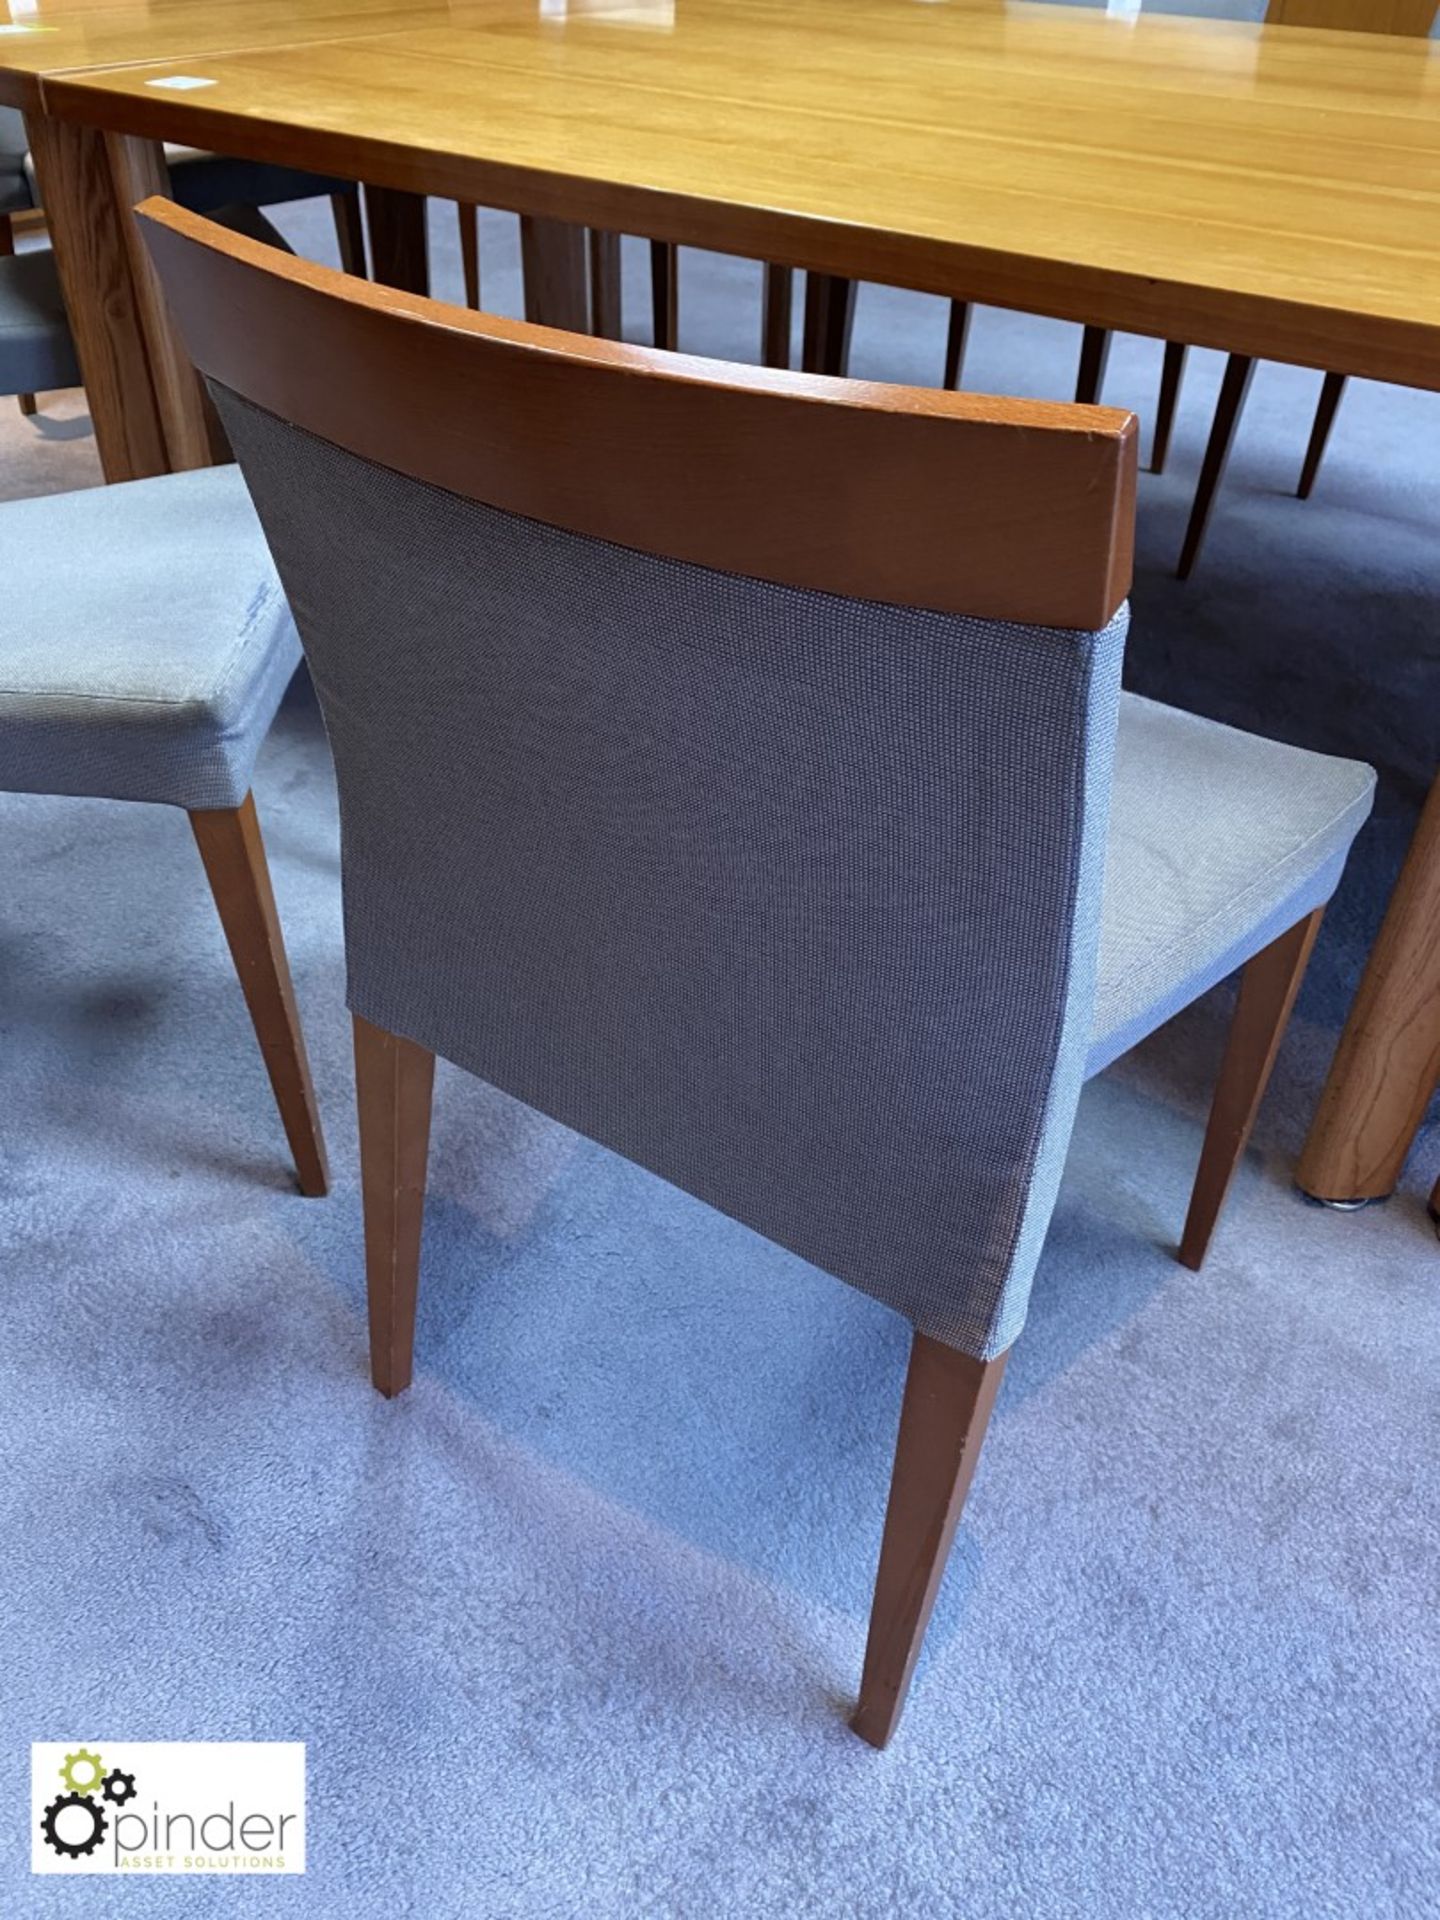 Set 11 Kesterport upholstered Meeting/Dining Chairs (located in Meeting Room 10 on 23rd Floor) - Image 2 of 3